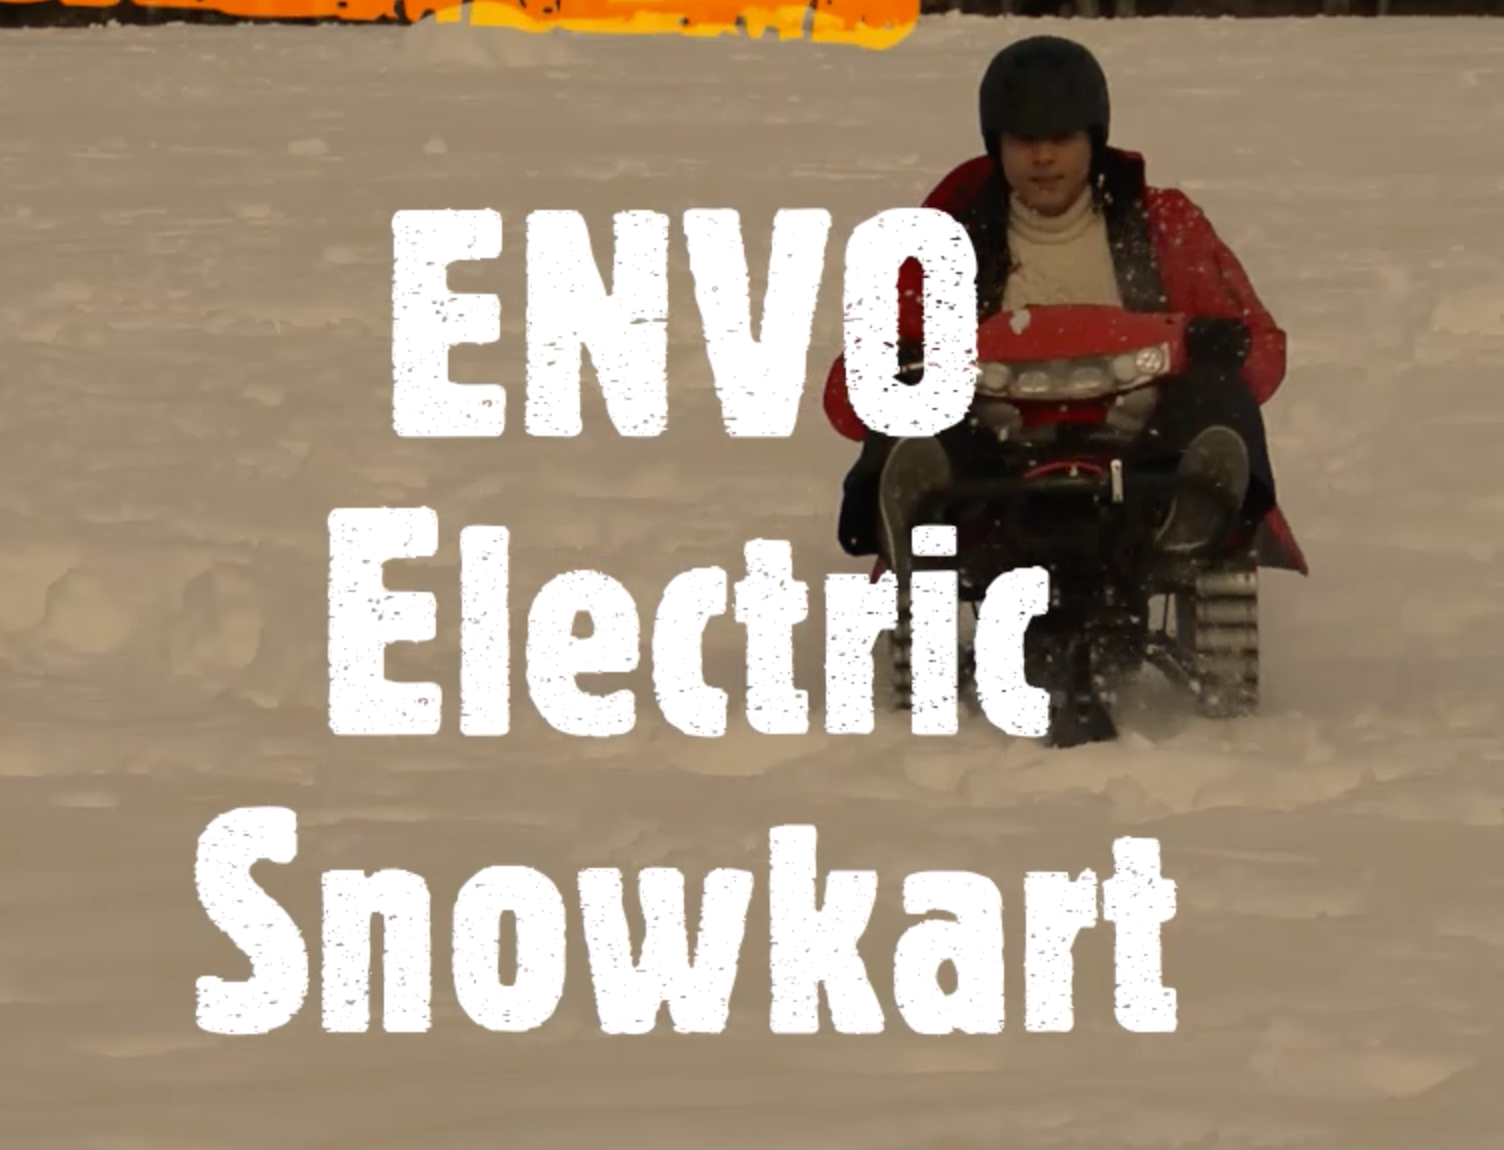 THE FIRST LOW-COST ELECTRIC SNOWKART